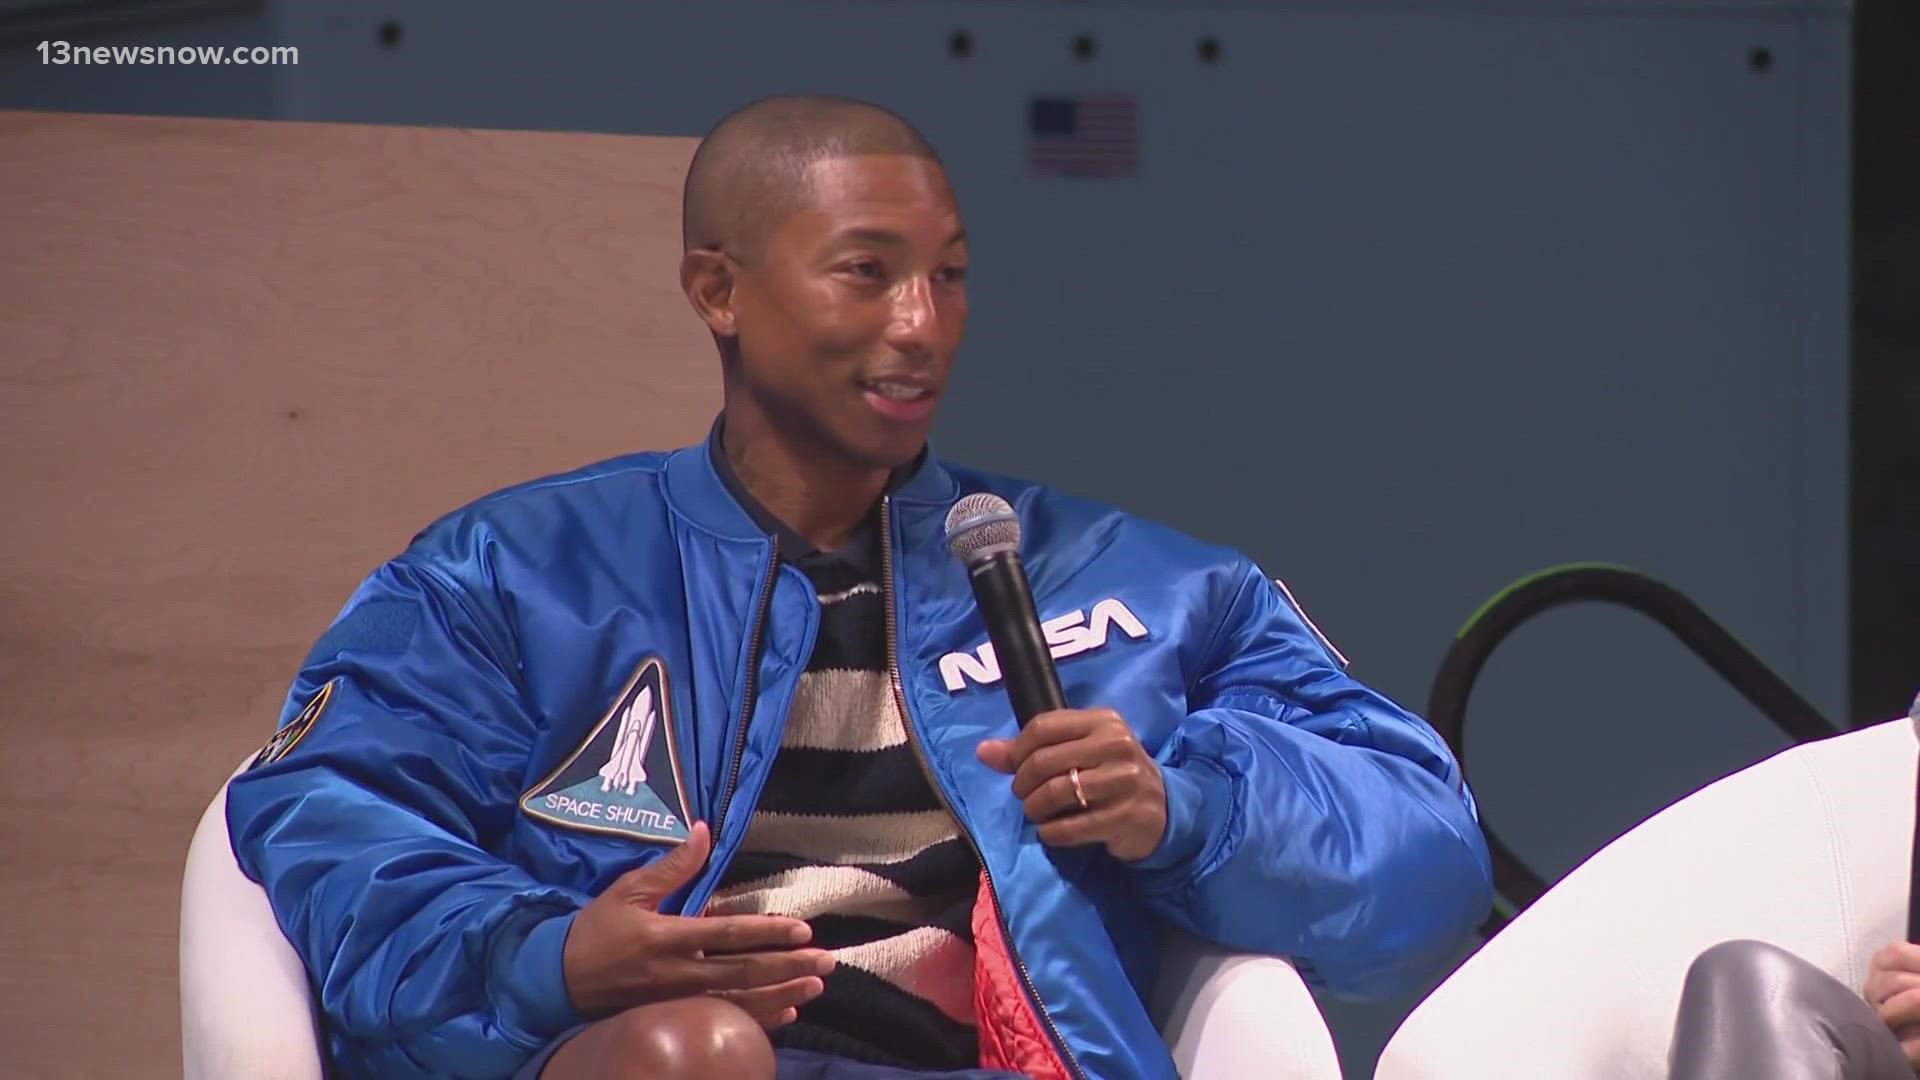 Might Dream is the business forum Pharrell Williams is bringing to Norfolk in November.